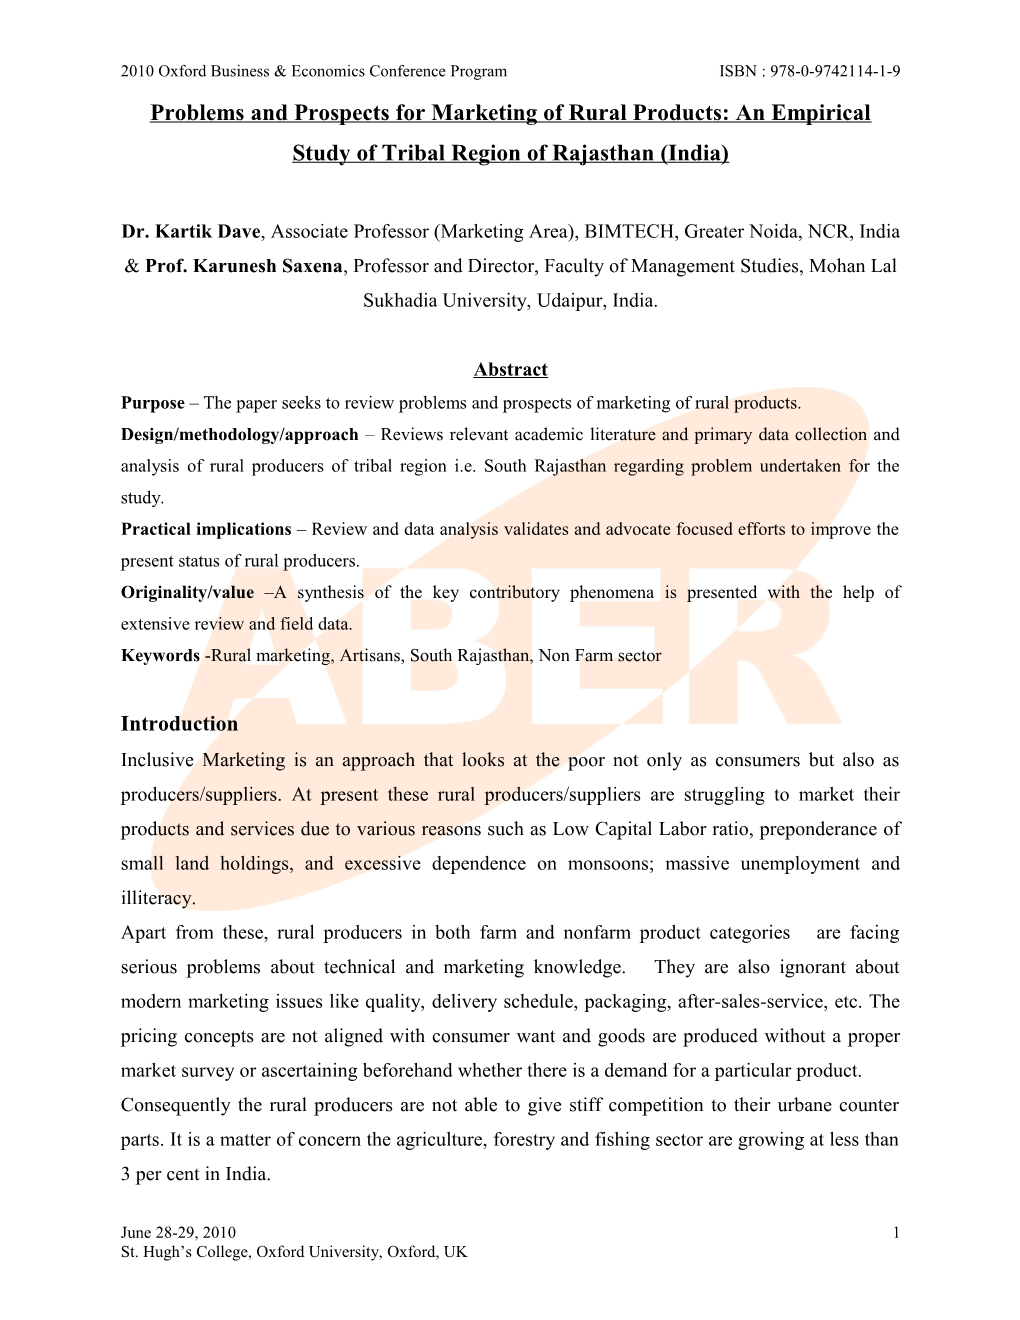 Problems and Prospects for Marketing of Rural Products: an Empirical Study of Tribal Region